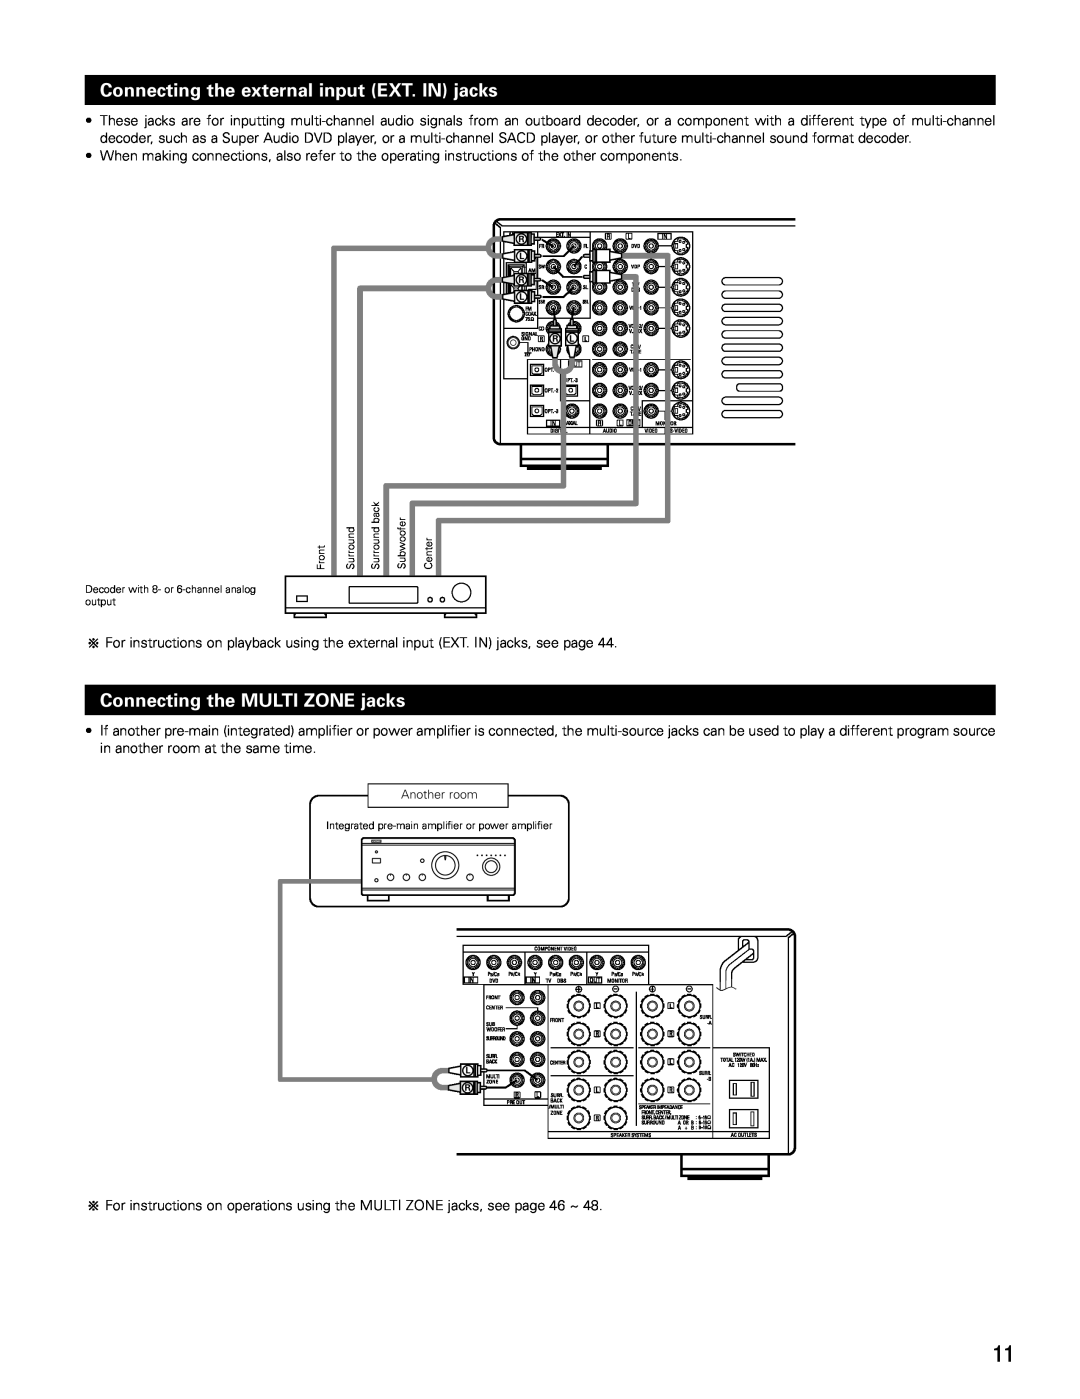 Denon AVR-3802 manual Connecting the external input EXT. IN jacks, Connecting the MULTI ZONE jacks, Another room 